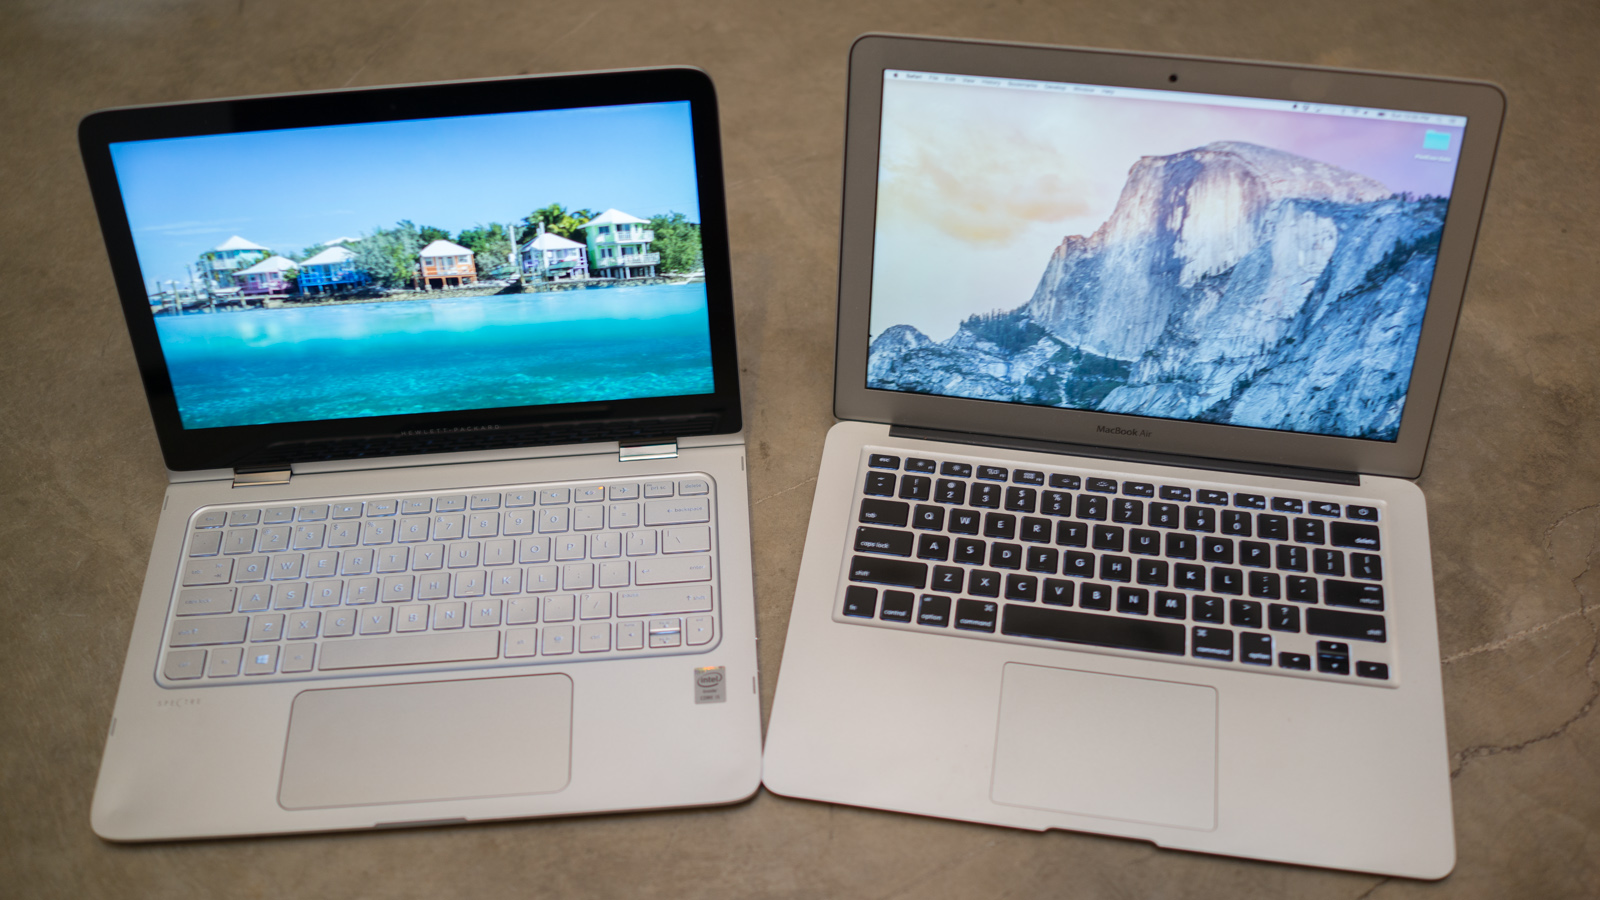 Hp Spectre X360 Left Next To Inch Apple Macbook Air Right